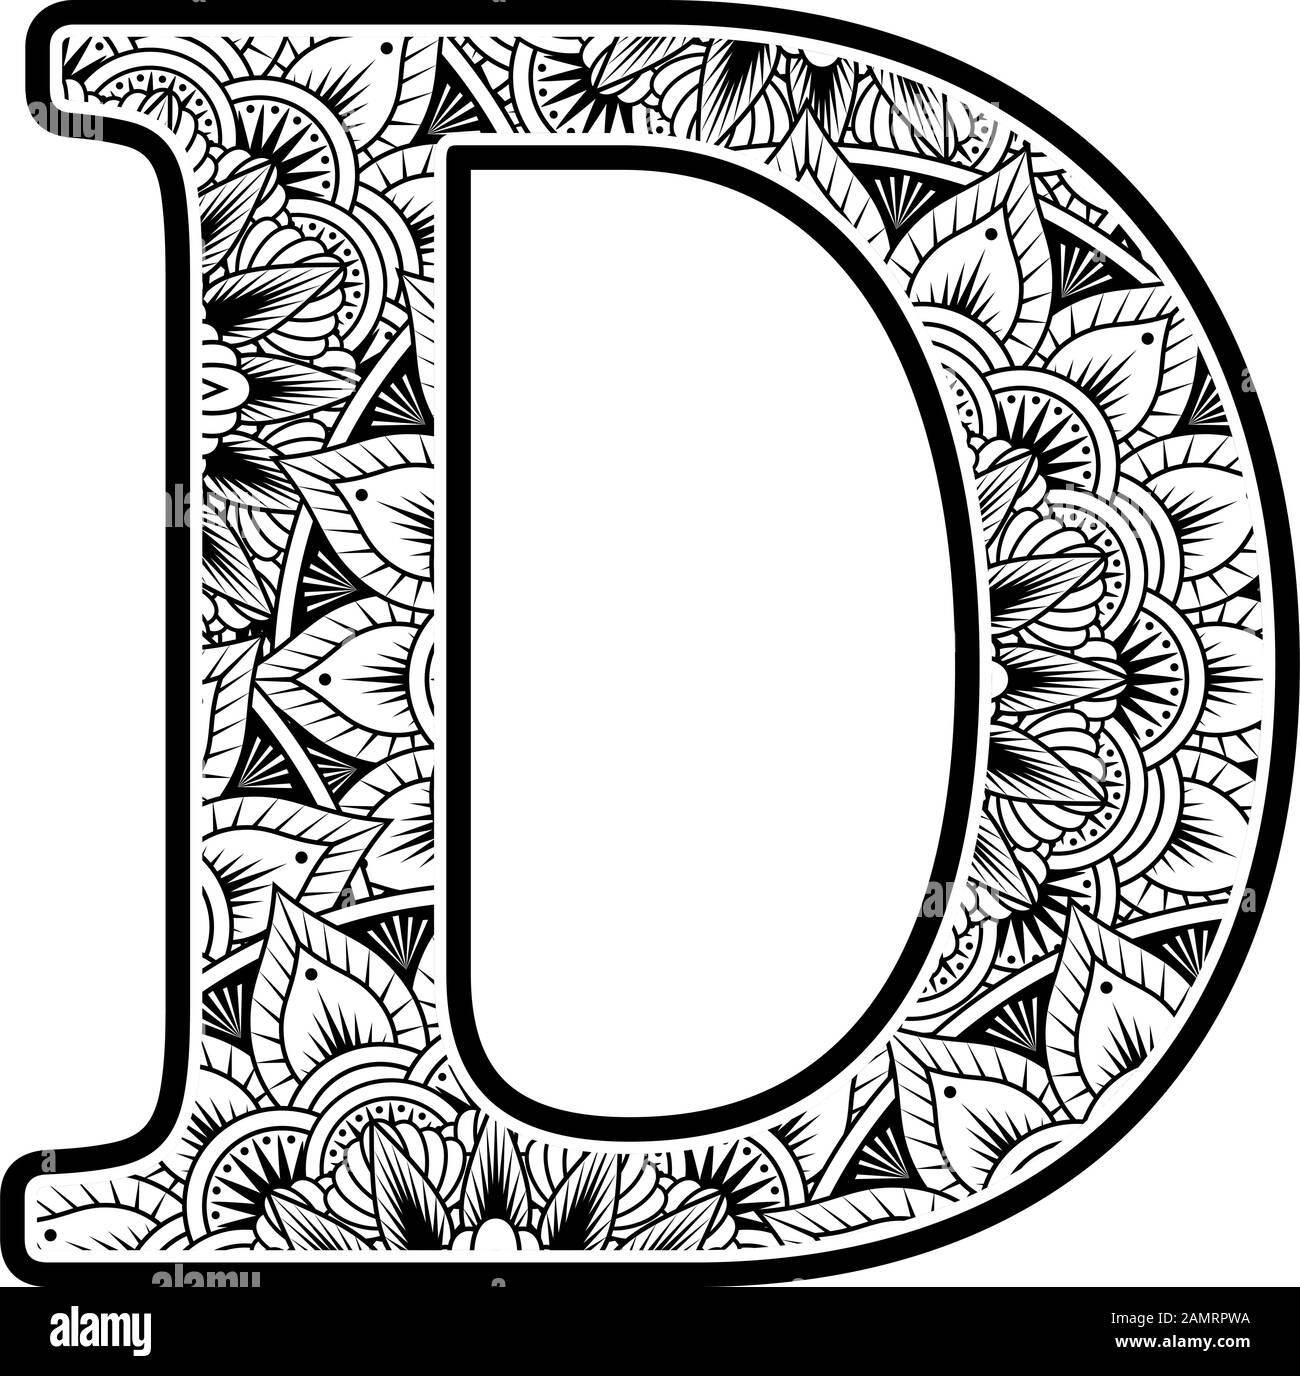 capital letter d with abstract flowers ornaments in black and white. design inspired from mandala art style for coloring. Isolated on white background Stock Vector